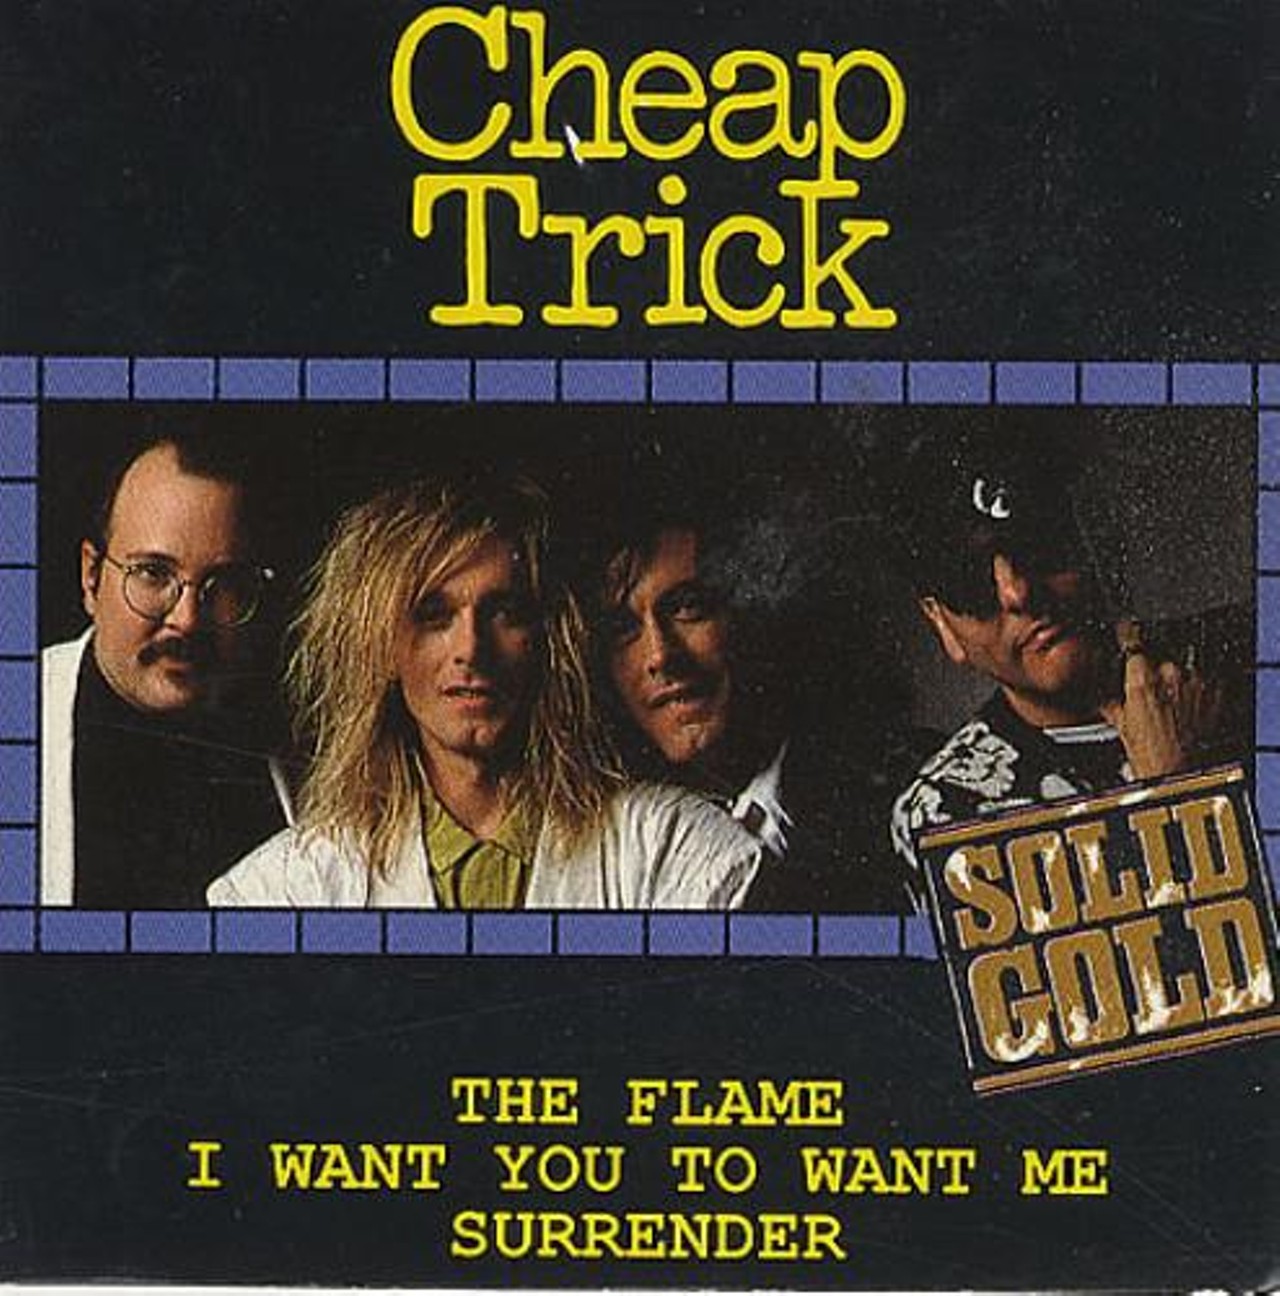 Cheap Trick released "The Flame" in 1988 on their "Lap of Luxury" album. The hit song immediately reached number one on the American Billboard Hot 100. It also topped the charts in Australia and Canada, and reached 11 in New Zealand.